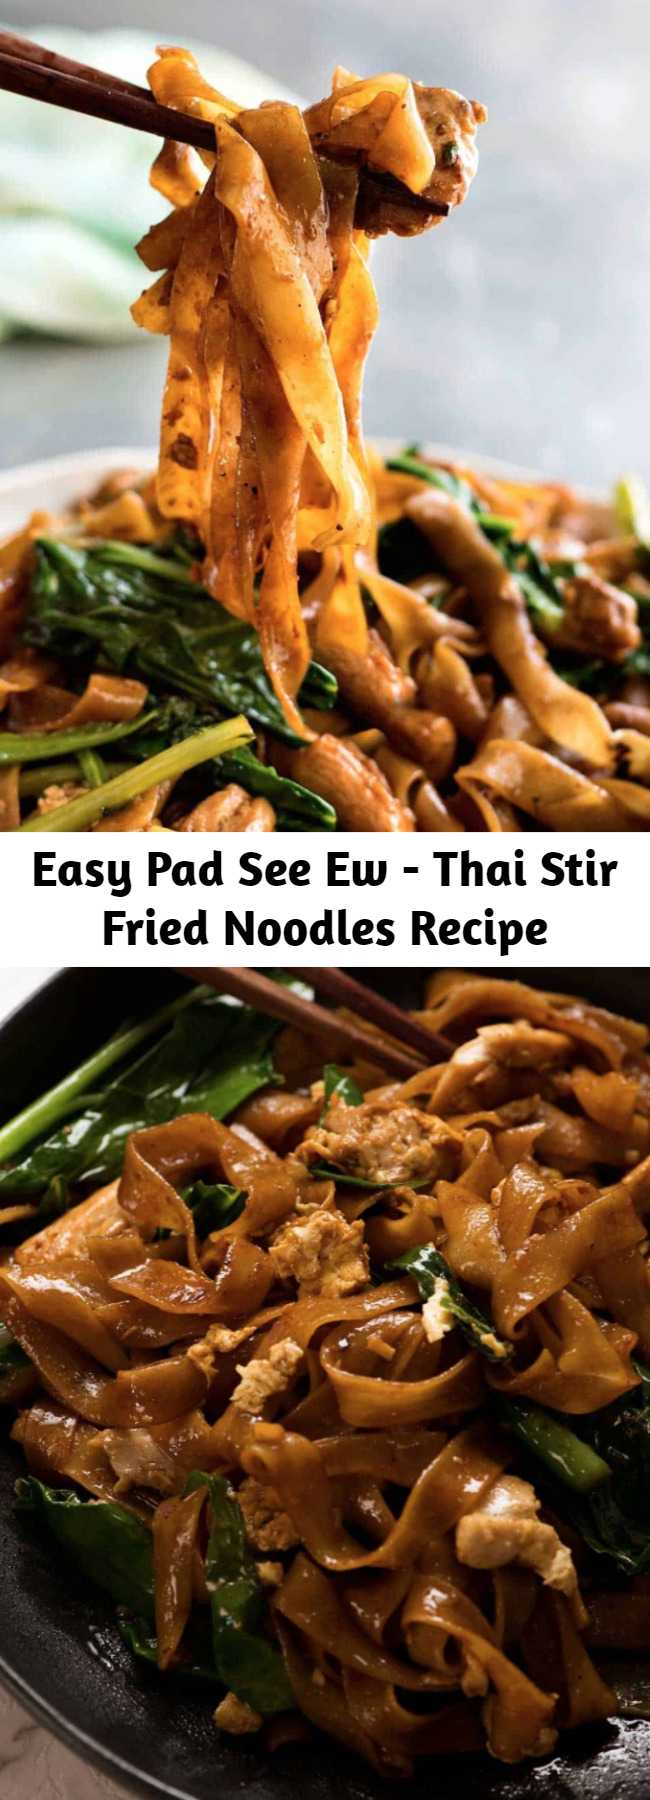 Easy Pad See Ew - Thai Stir Fried Noodles Recipe - Pad See Ew (which means Stir Fried Soy Sauce noodles) is one of the most popular Thai street foods. Traditionally made with Sen Yai which are wide, thin rice noodles which are not that easy to come by. So use dried rice noodles instead - I've eaten enough Pad See Ew at Thai restaurants to assure you that there is no compromise on flavour! On the table in 15 minutes. #Noodles #Chicken #Broccoli #Fast